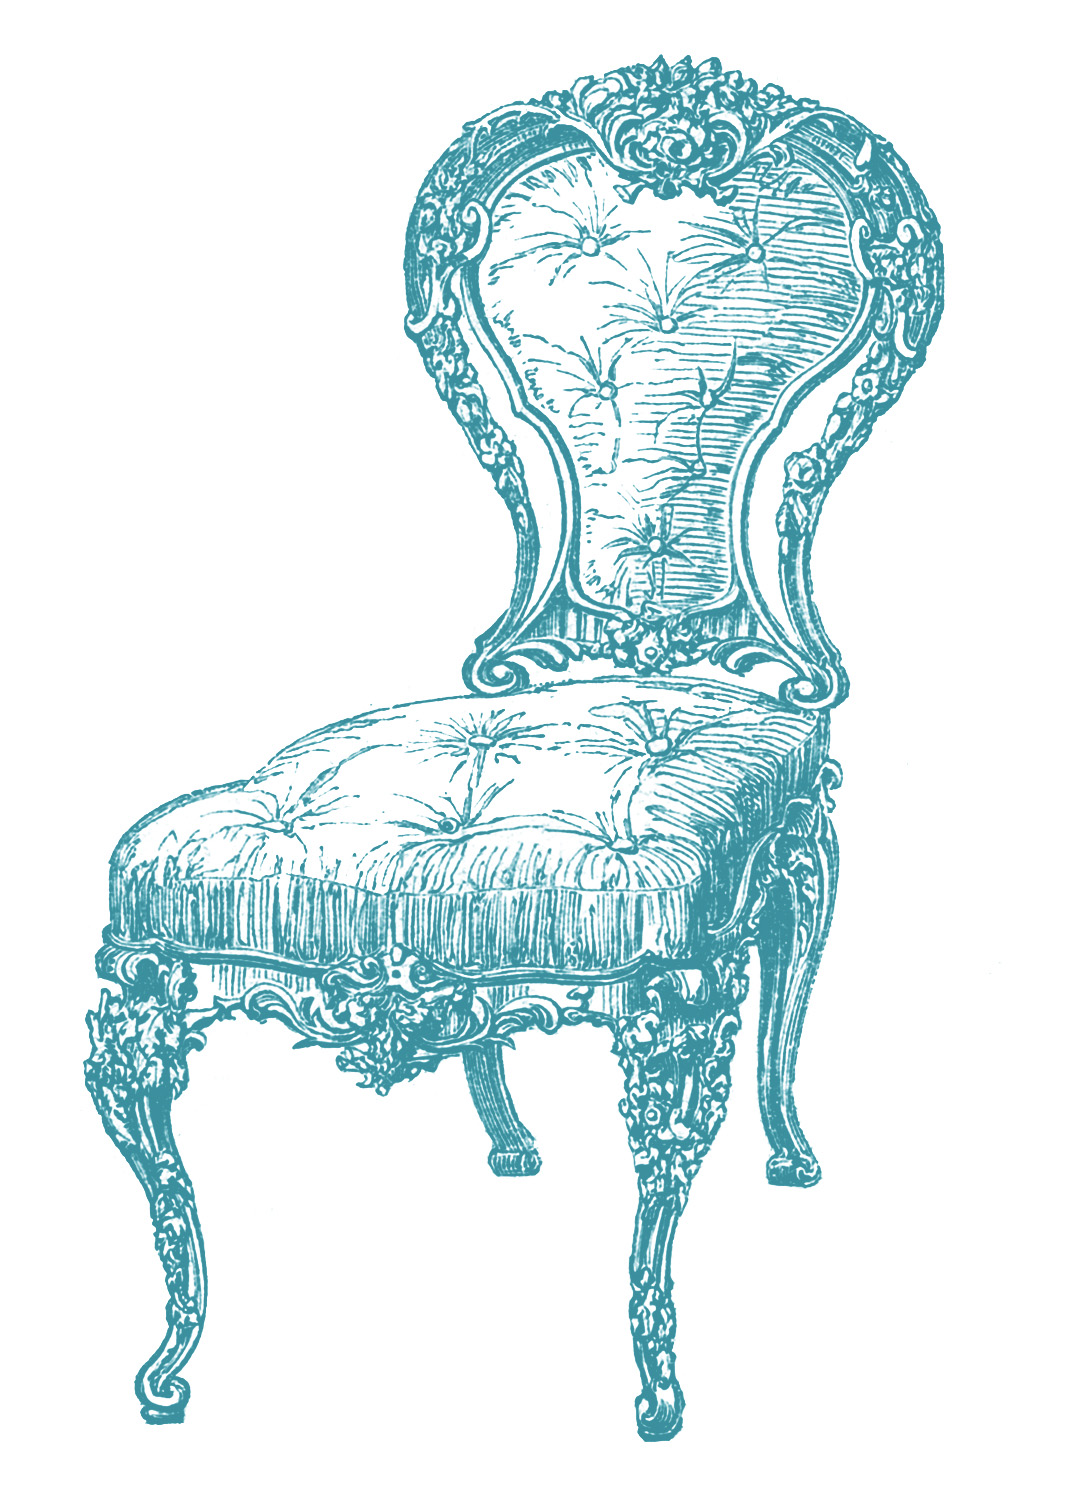 Vintage Clip Art   Frenchy Chair   4 Options   The Graphics Fairy